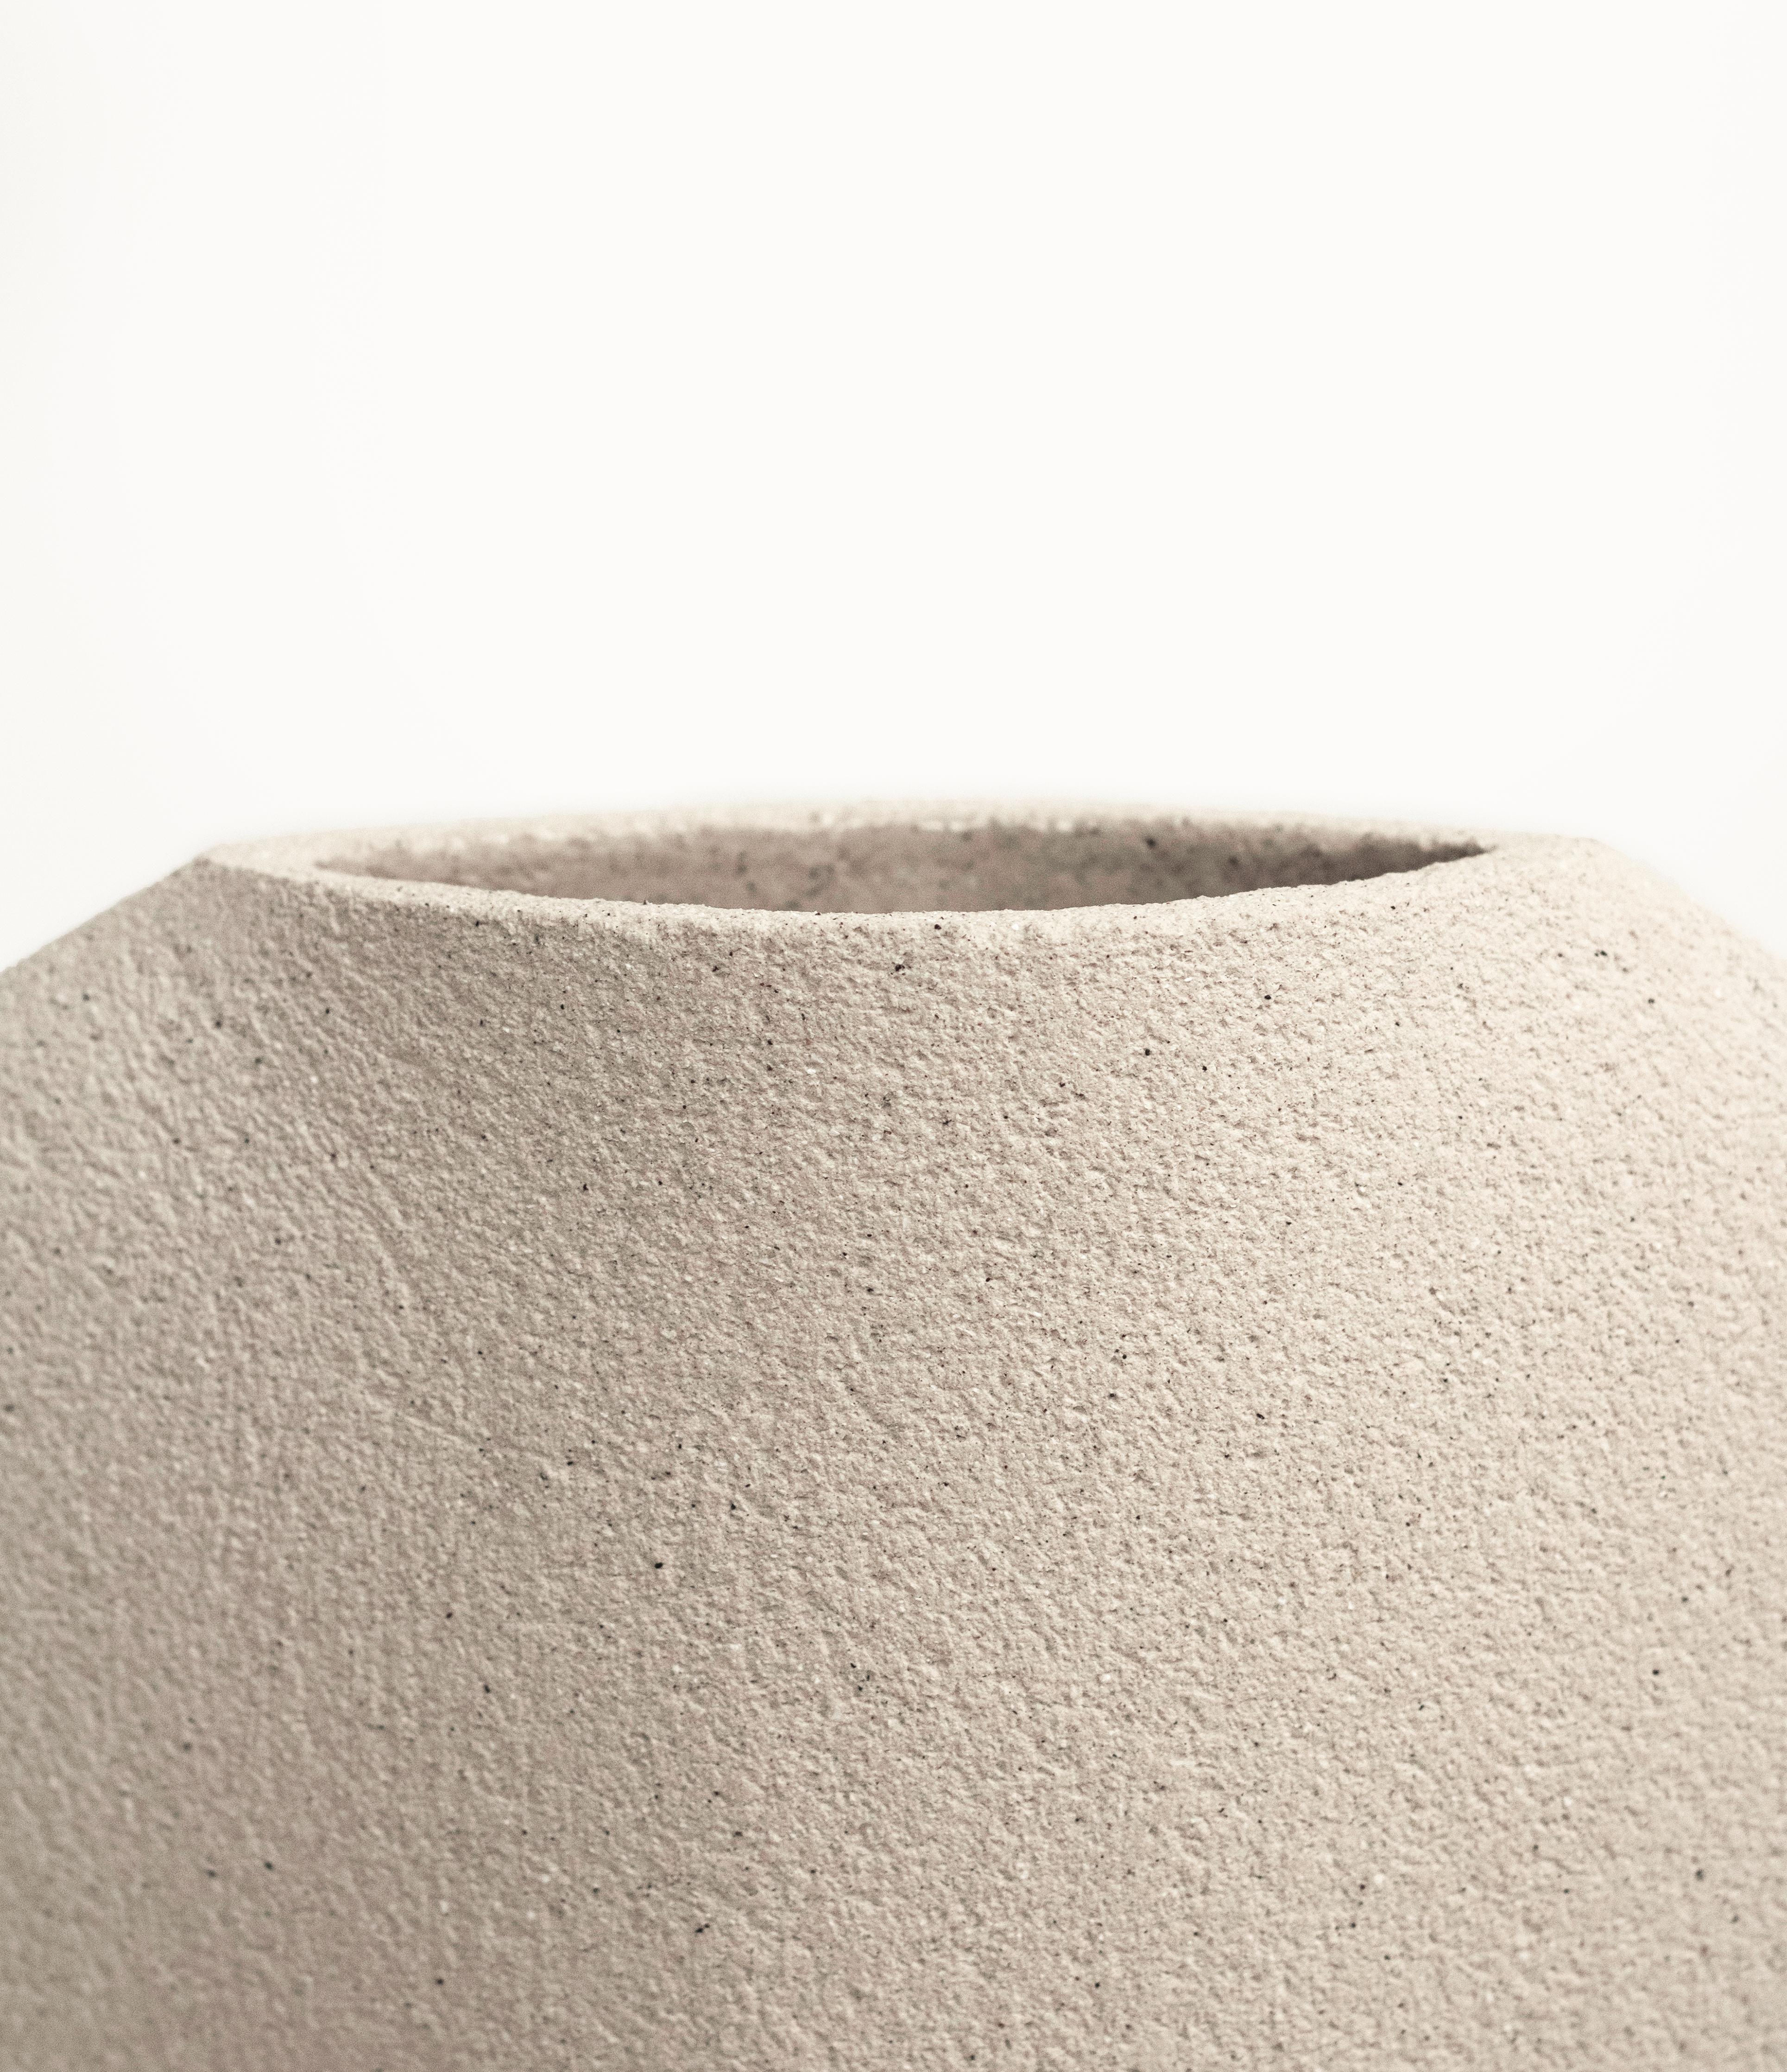 Minimalist 21st Century Clover Vase in White Ceramic, Hand-Crafted in France